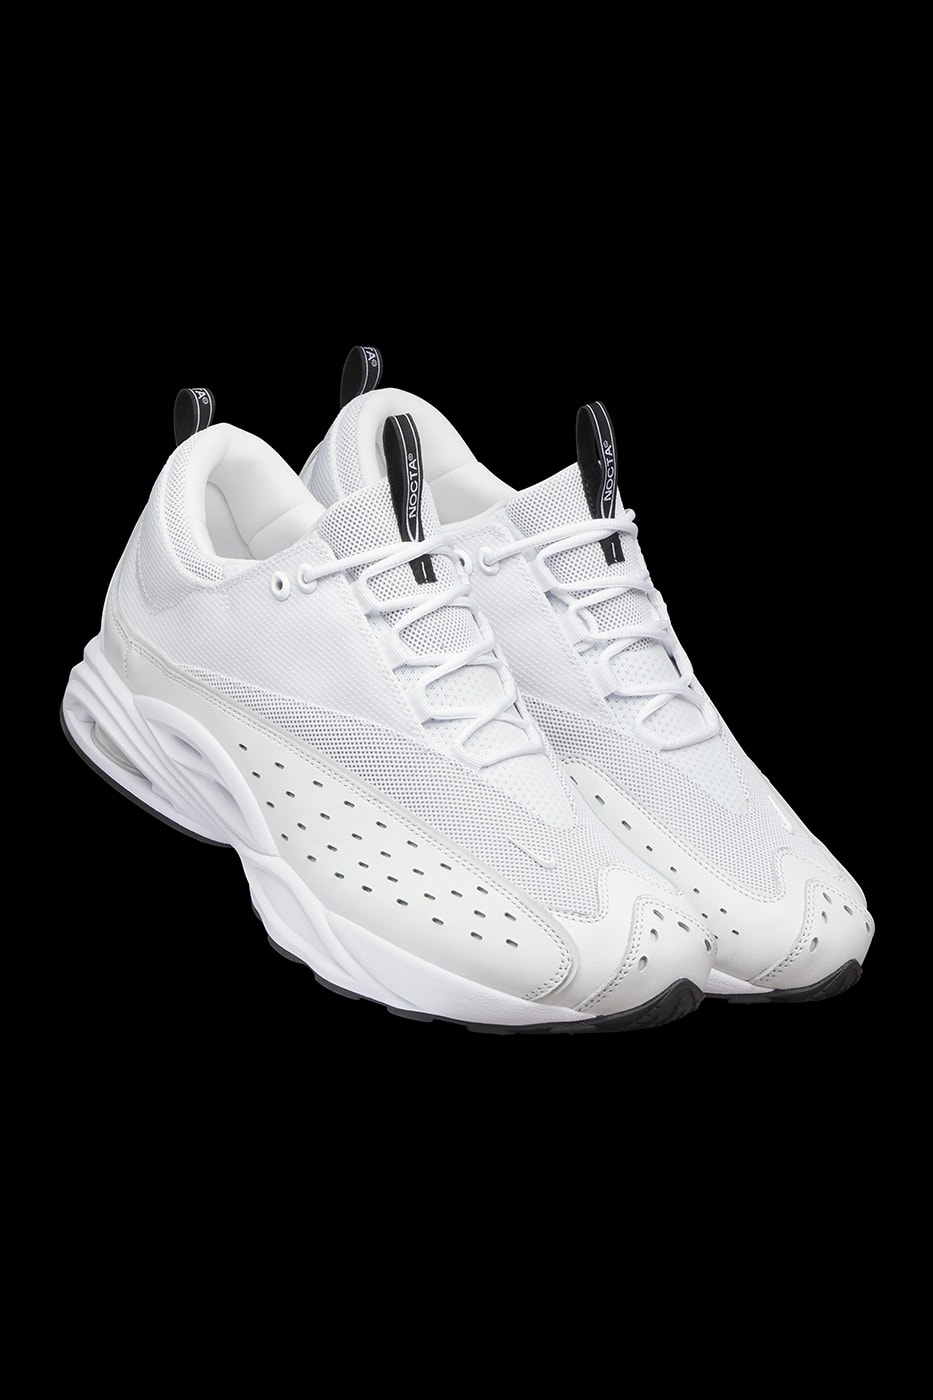 Drake Drops Key Essentials With Nike NOCTA Cardinal Stock Spring 2024 Collection NOCTA Air Zoom Drive Summit White DX5854-100 